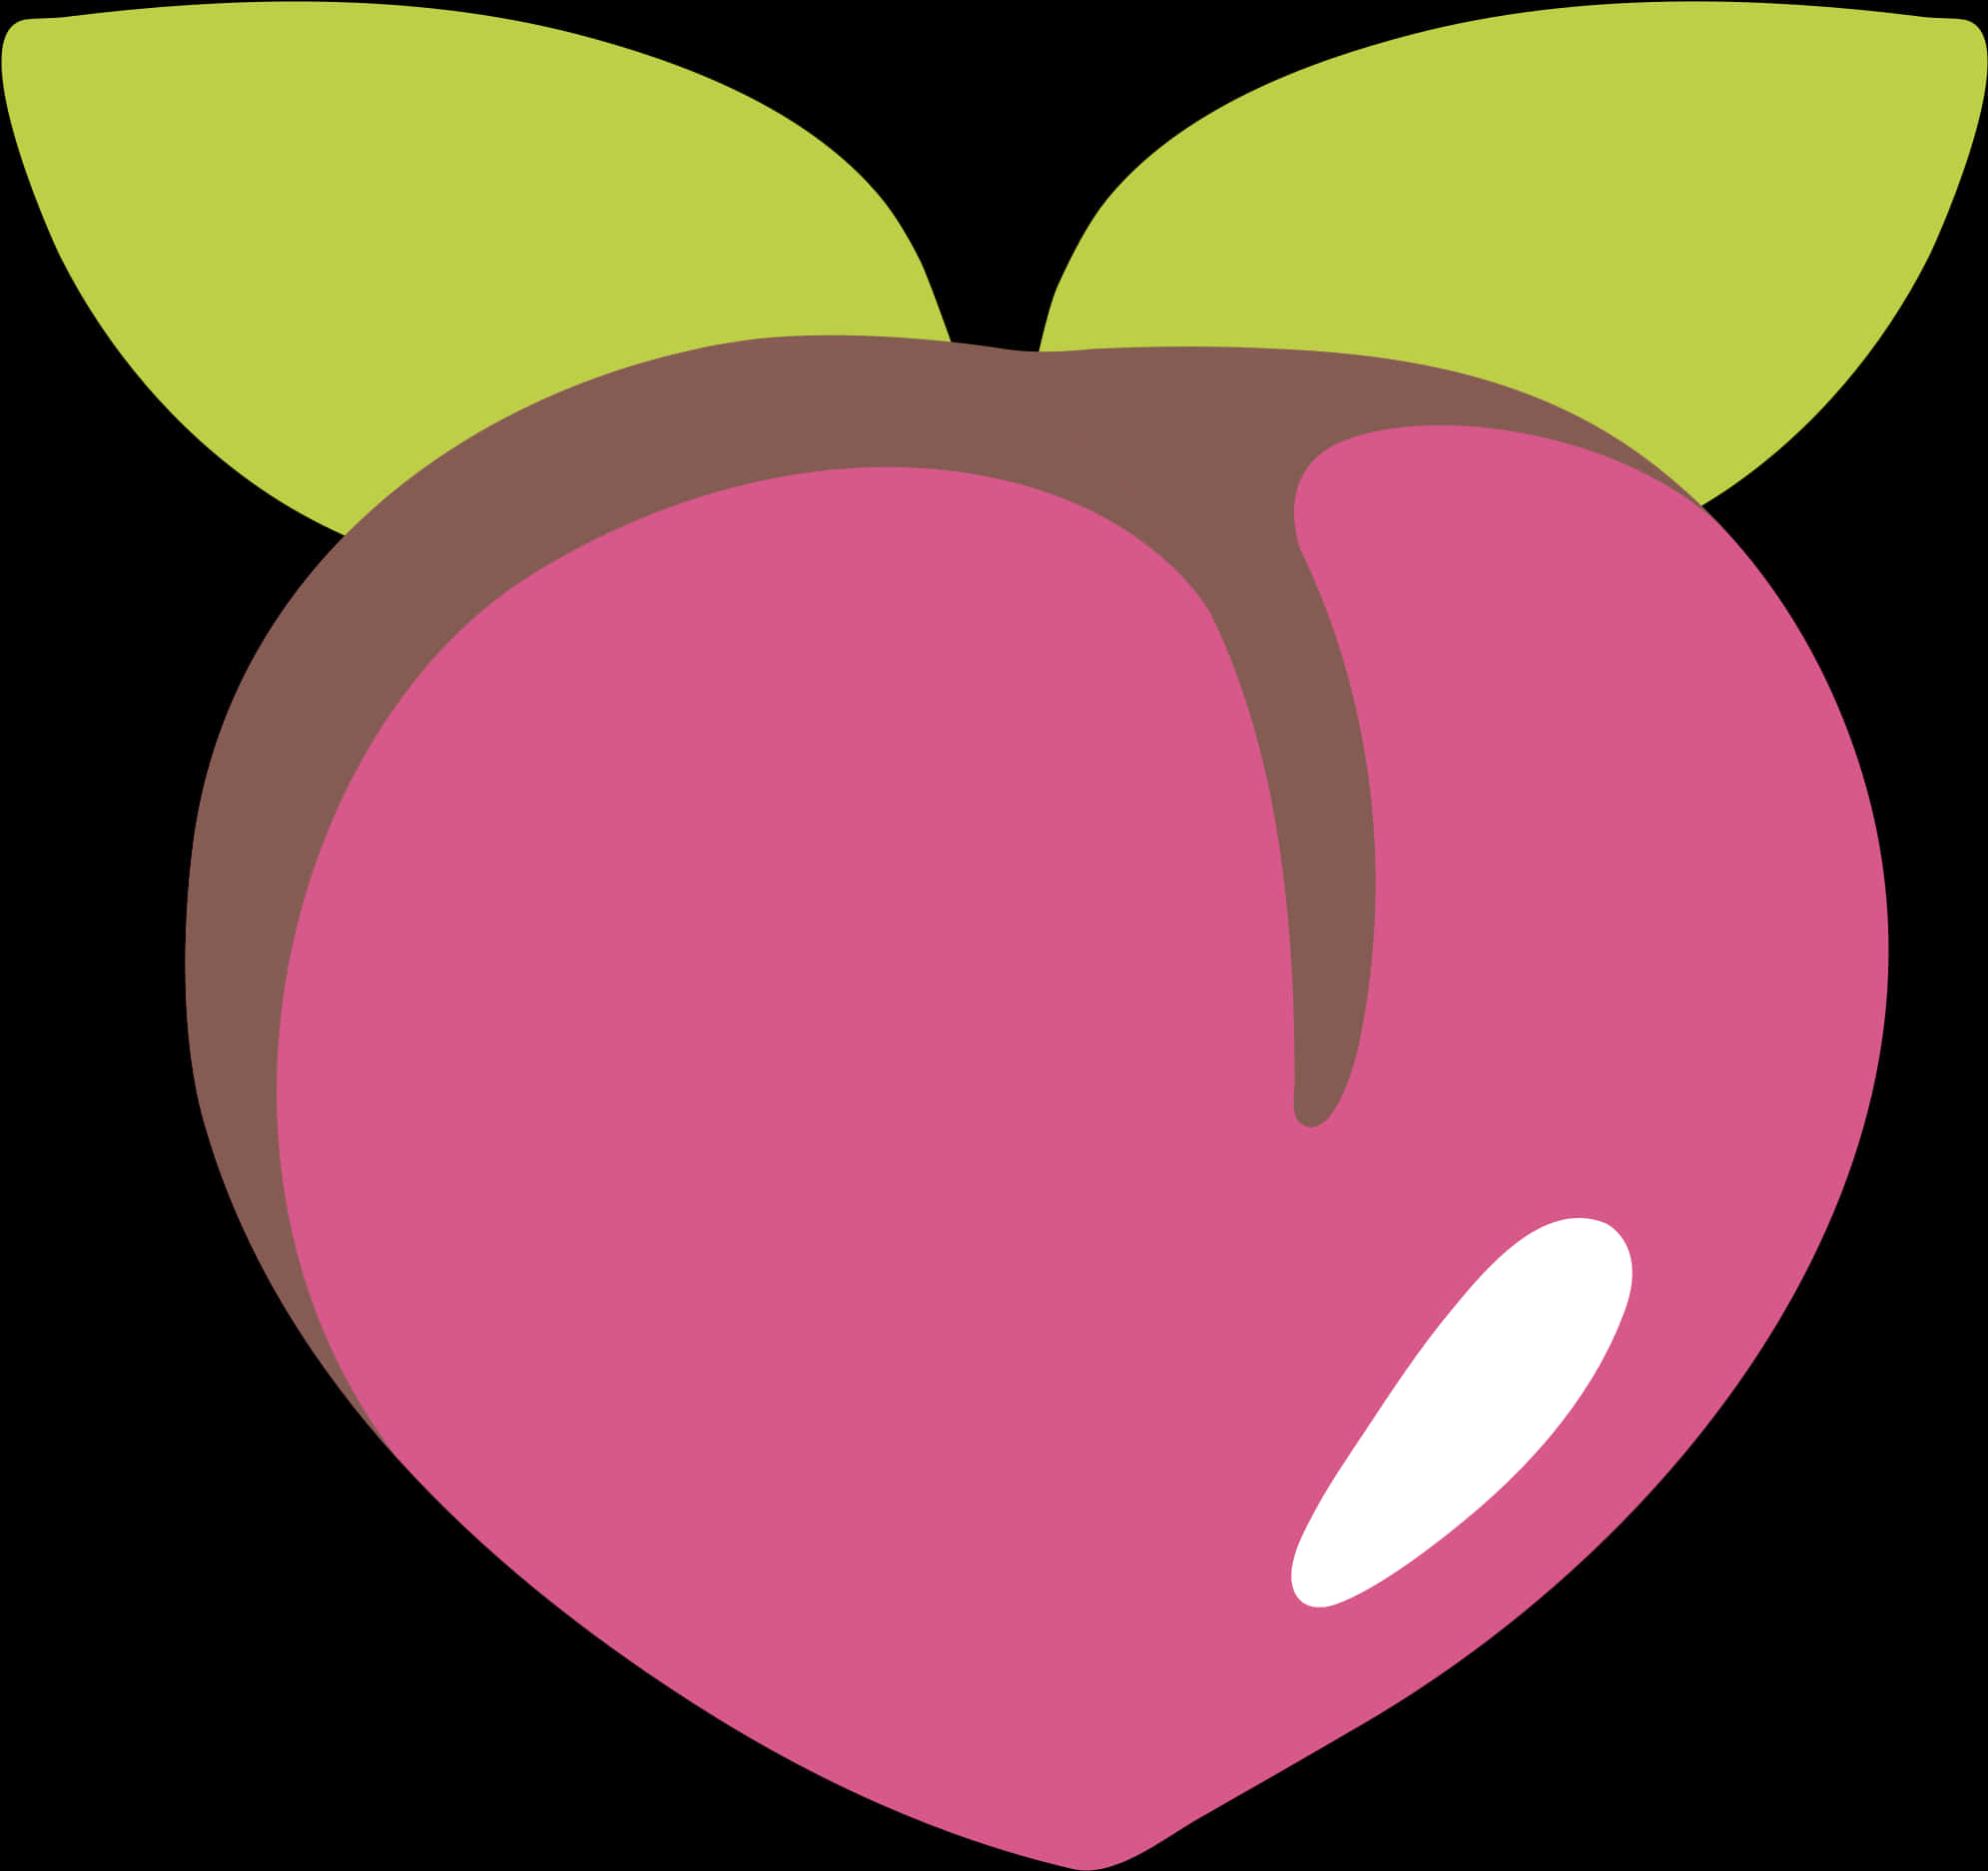 Stylized Peach Graphic PNG image